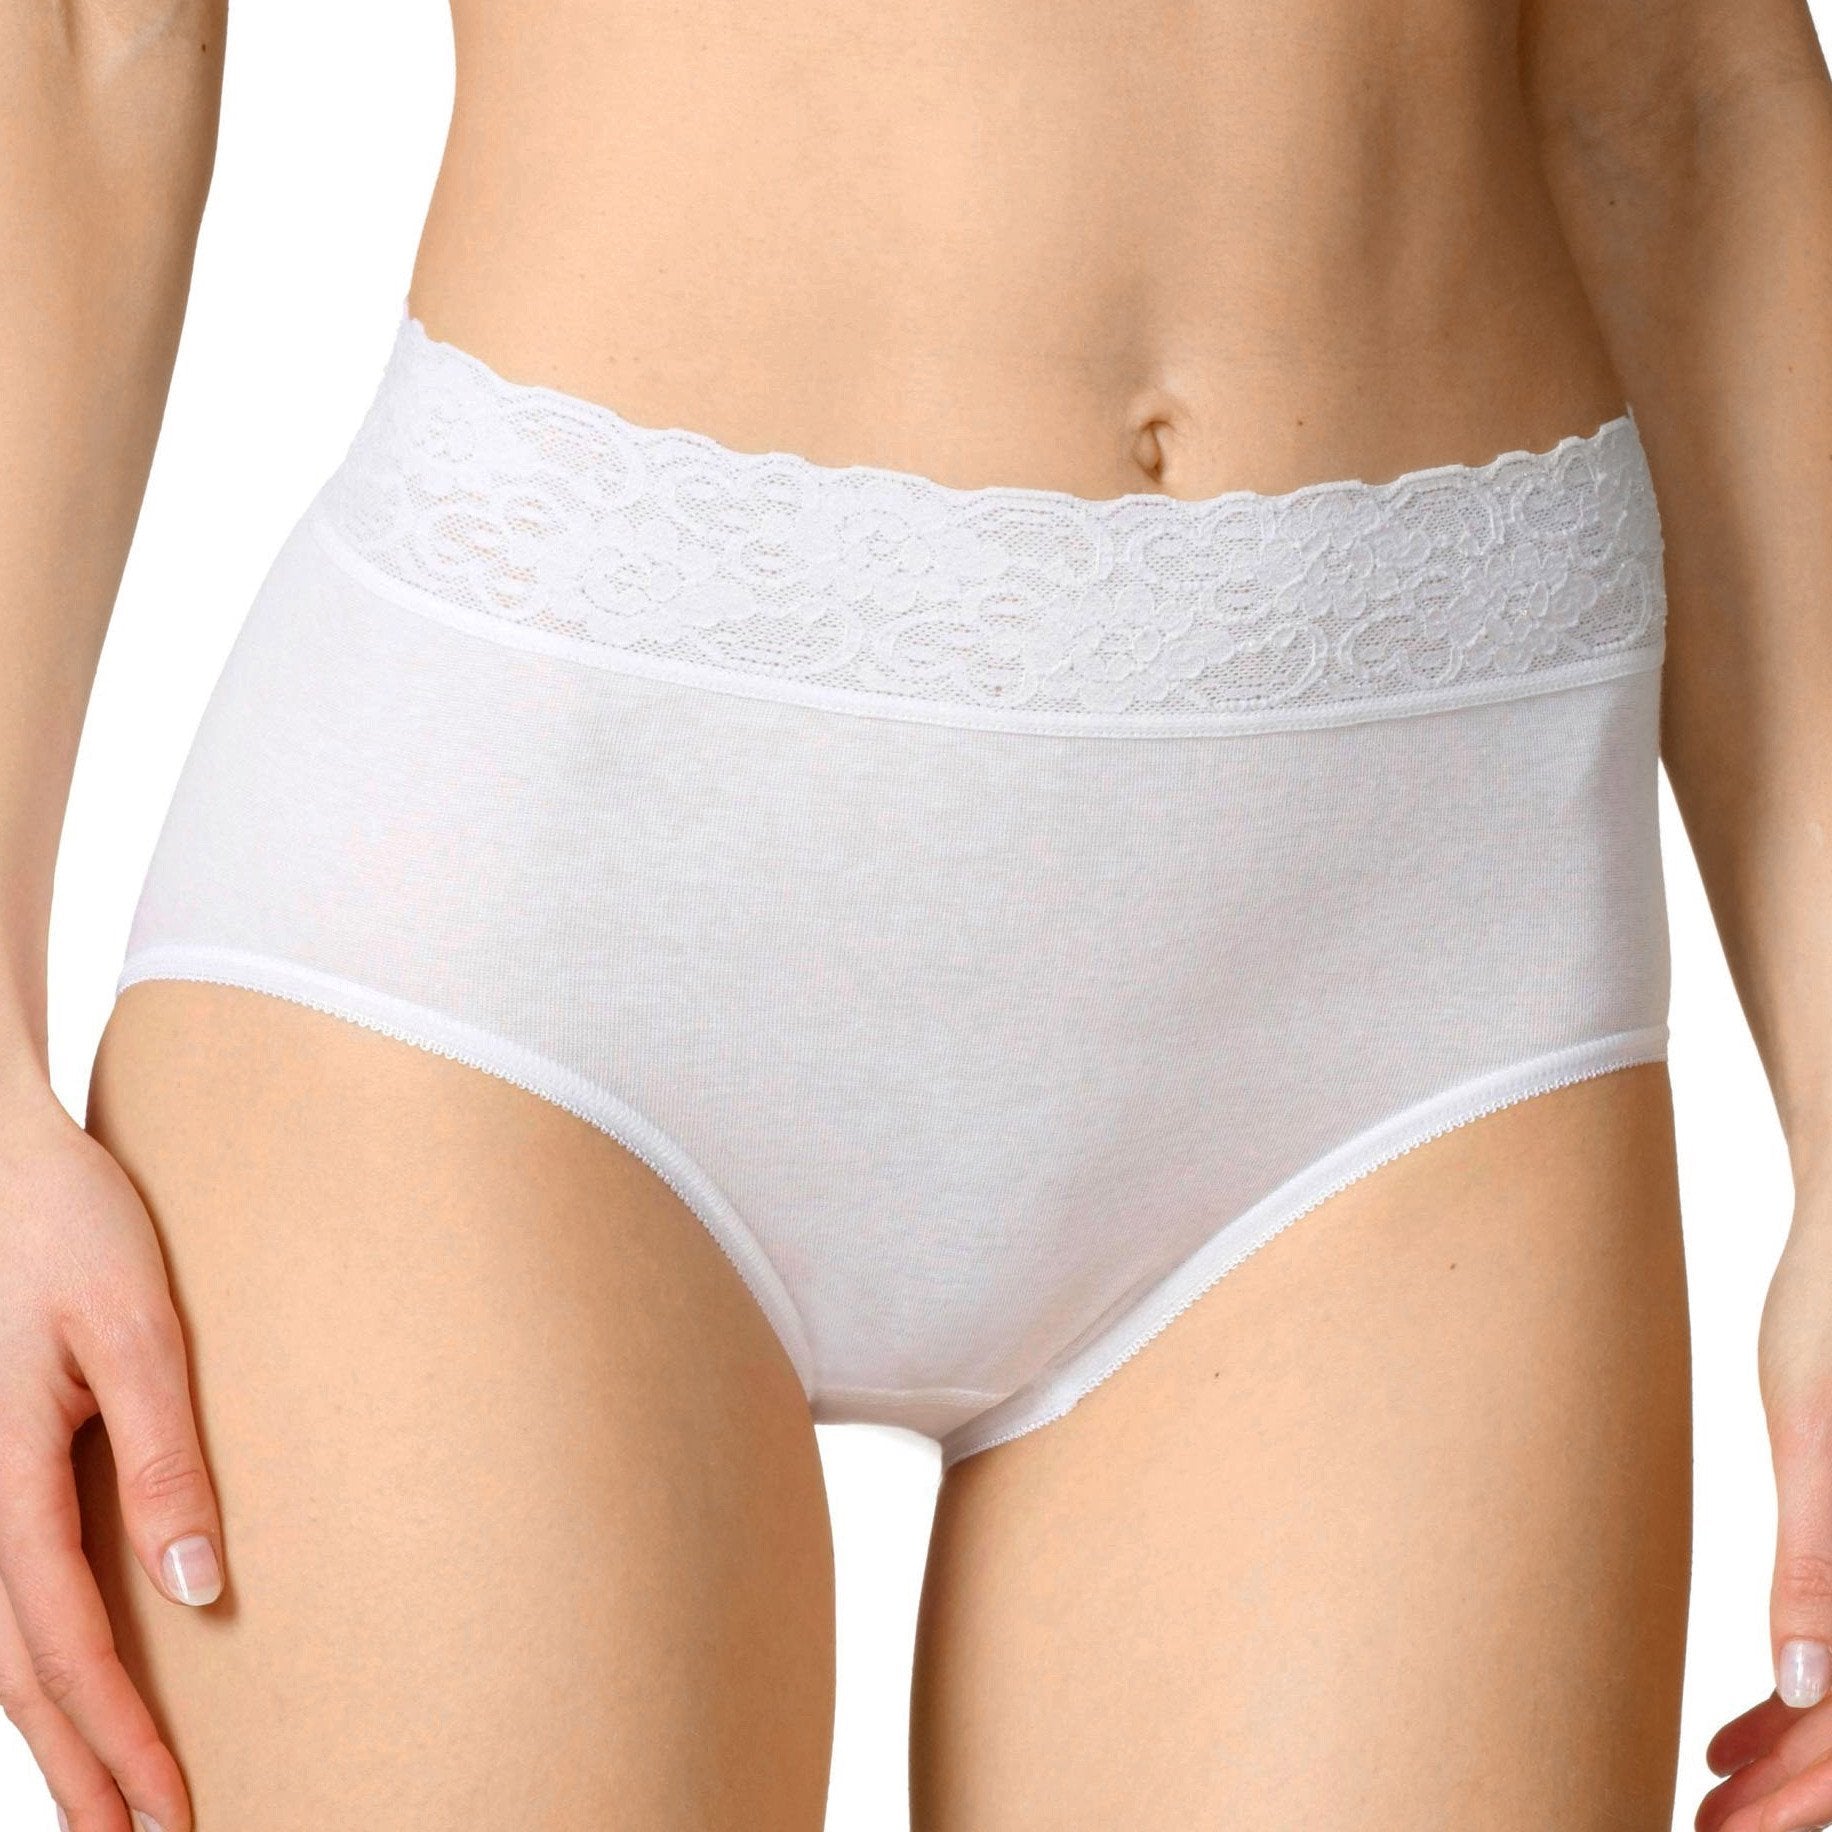 Lace Brief Panty